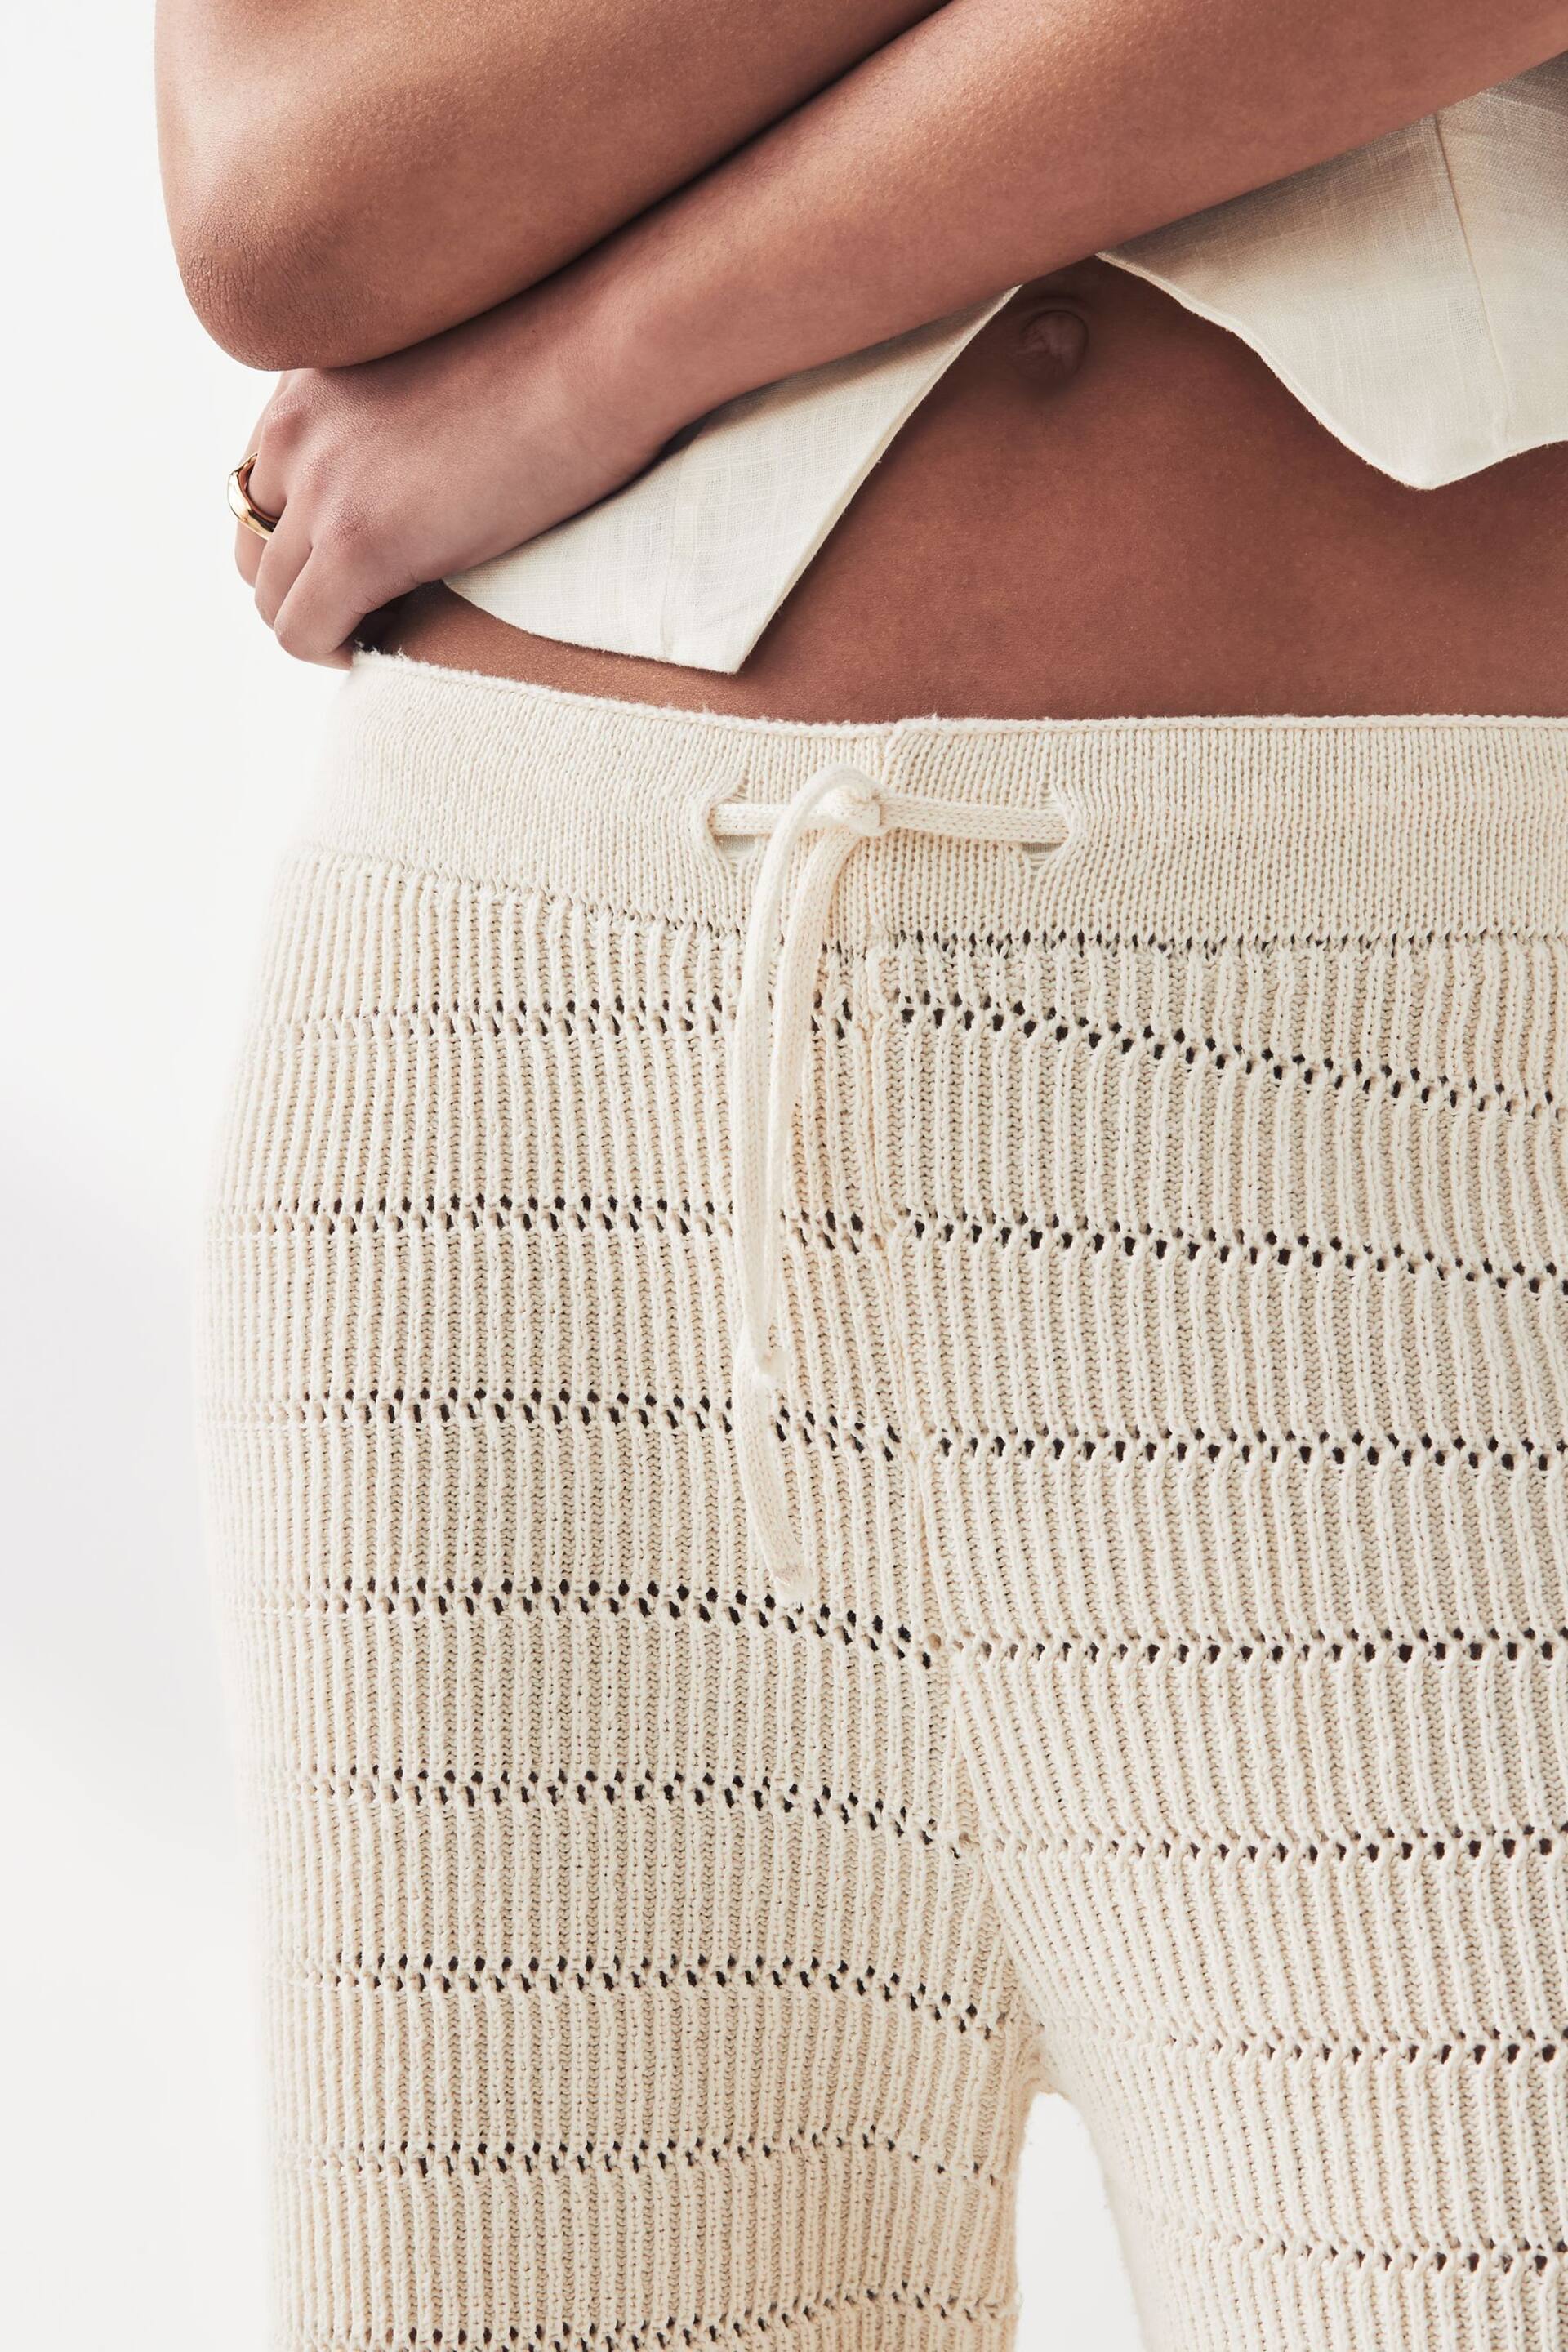 ONLY Cream Wide Leg Crochet Beach Trousers - Image 3 of 5